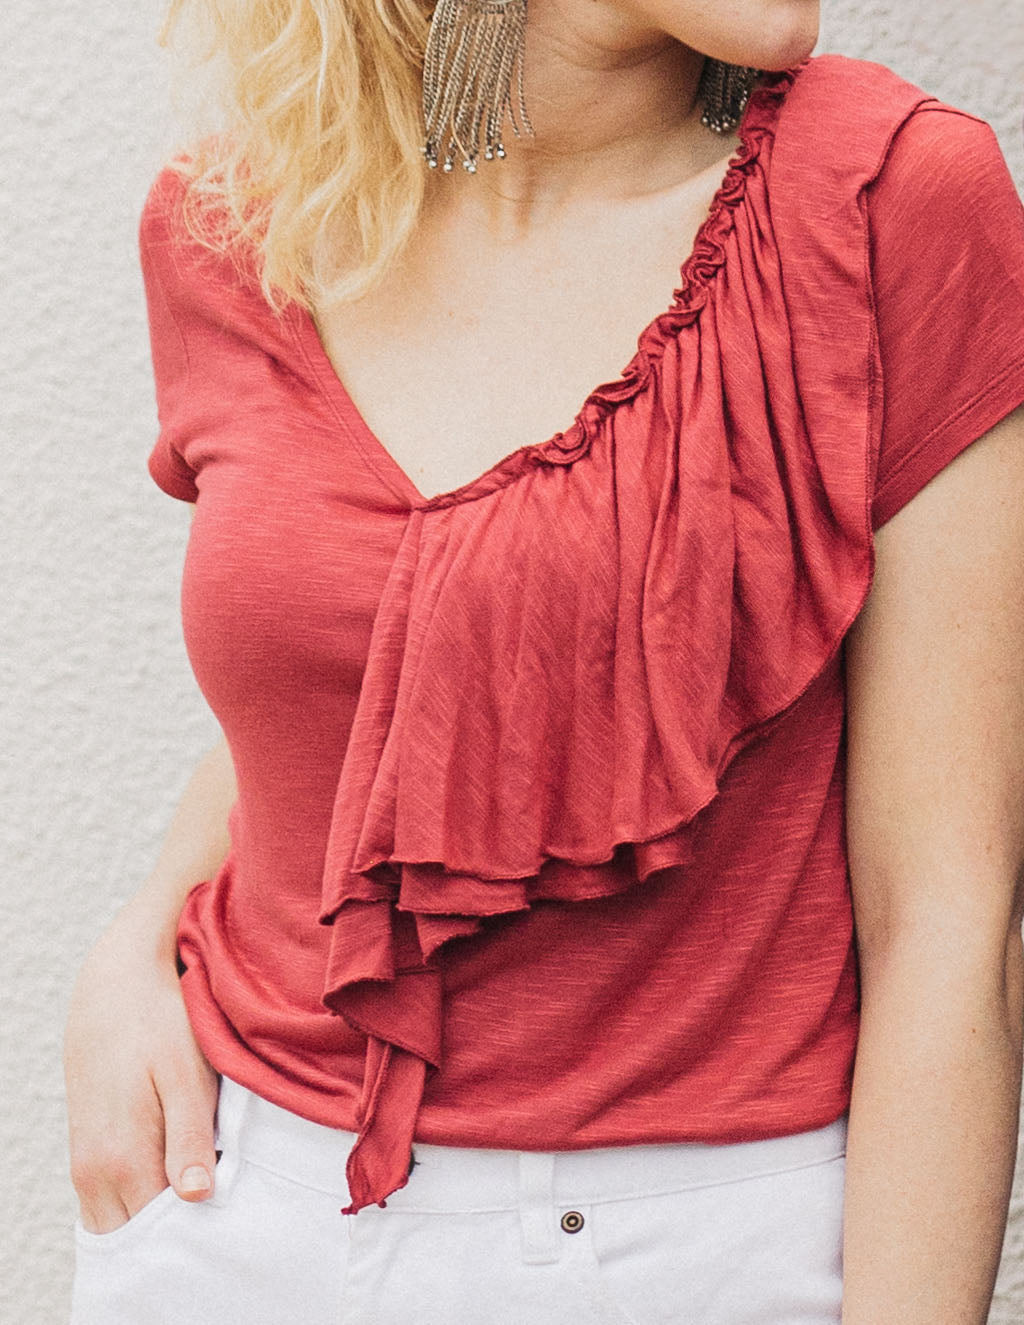 KELSEY double ruffle tee in Red Spice